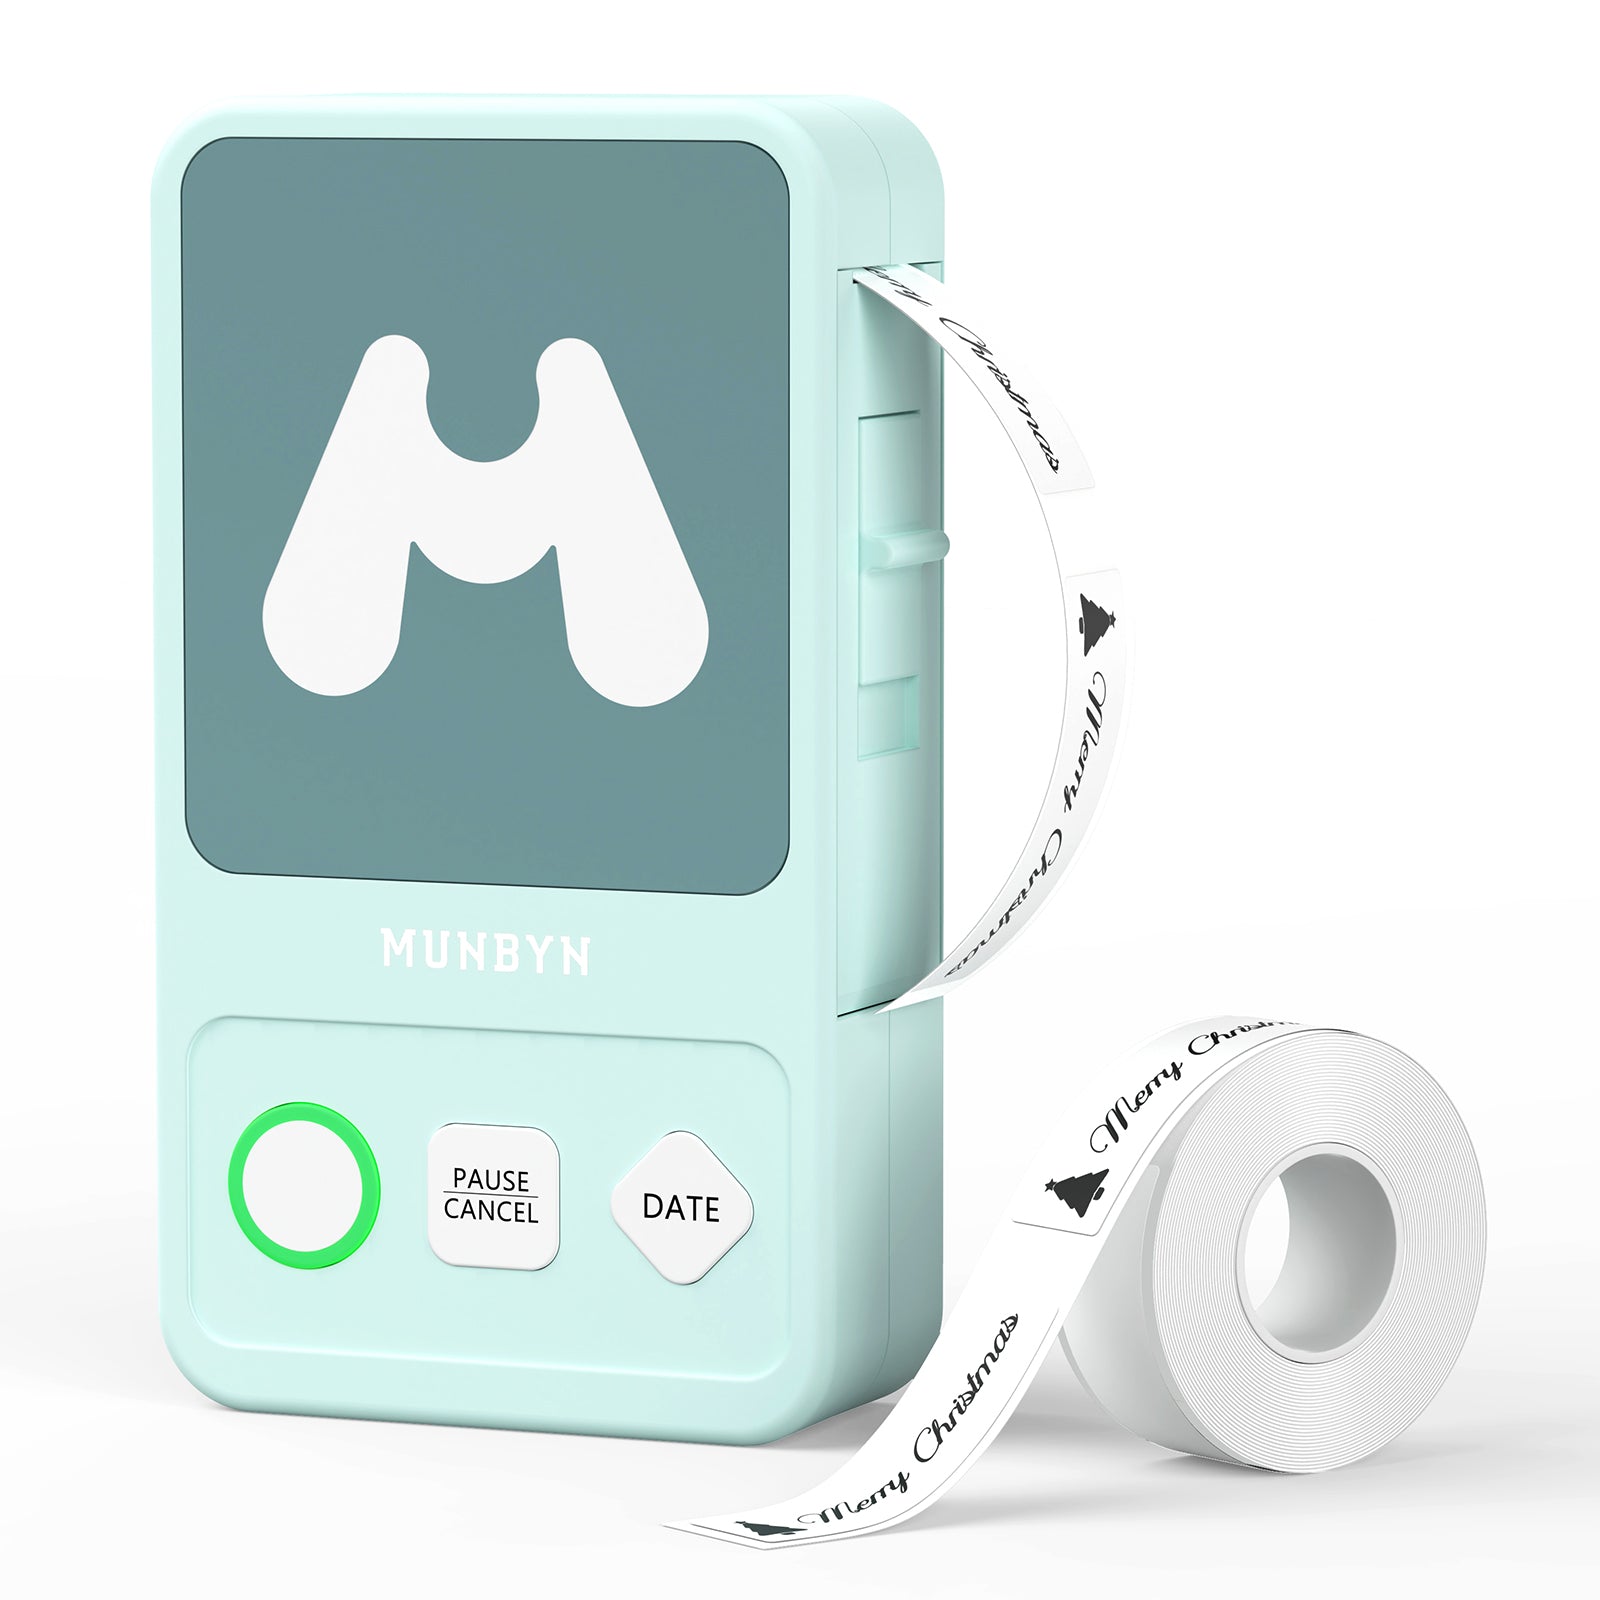 MUNBYN Portable Bluetooth Label Maker FM520 with labels